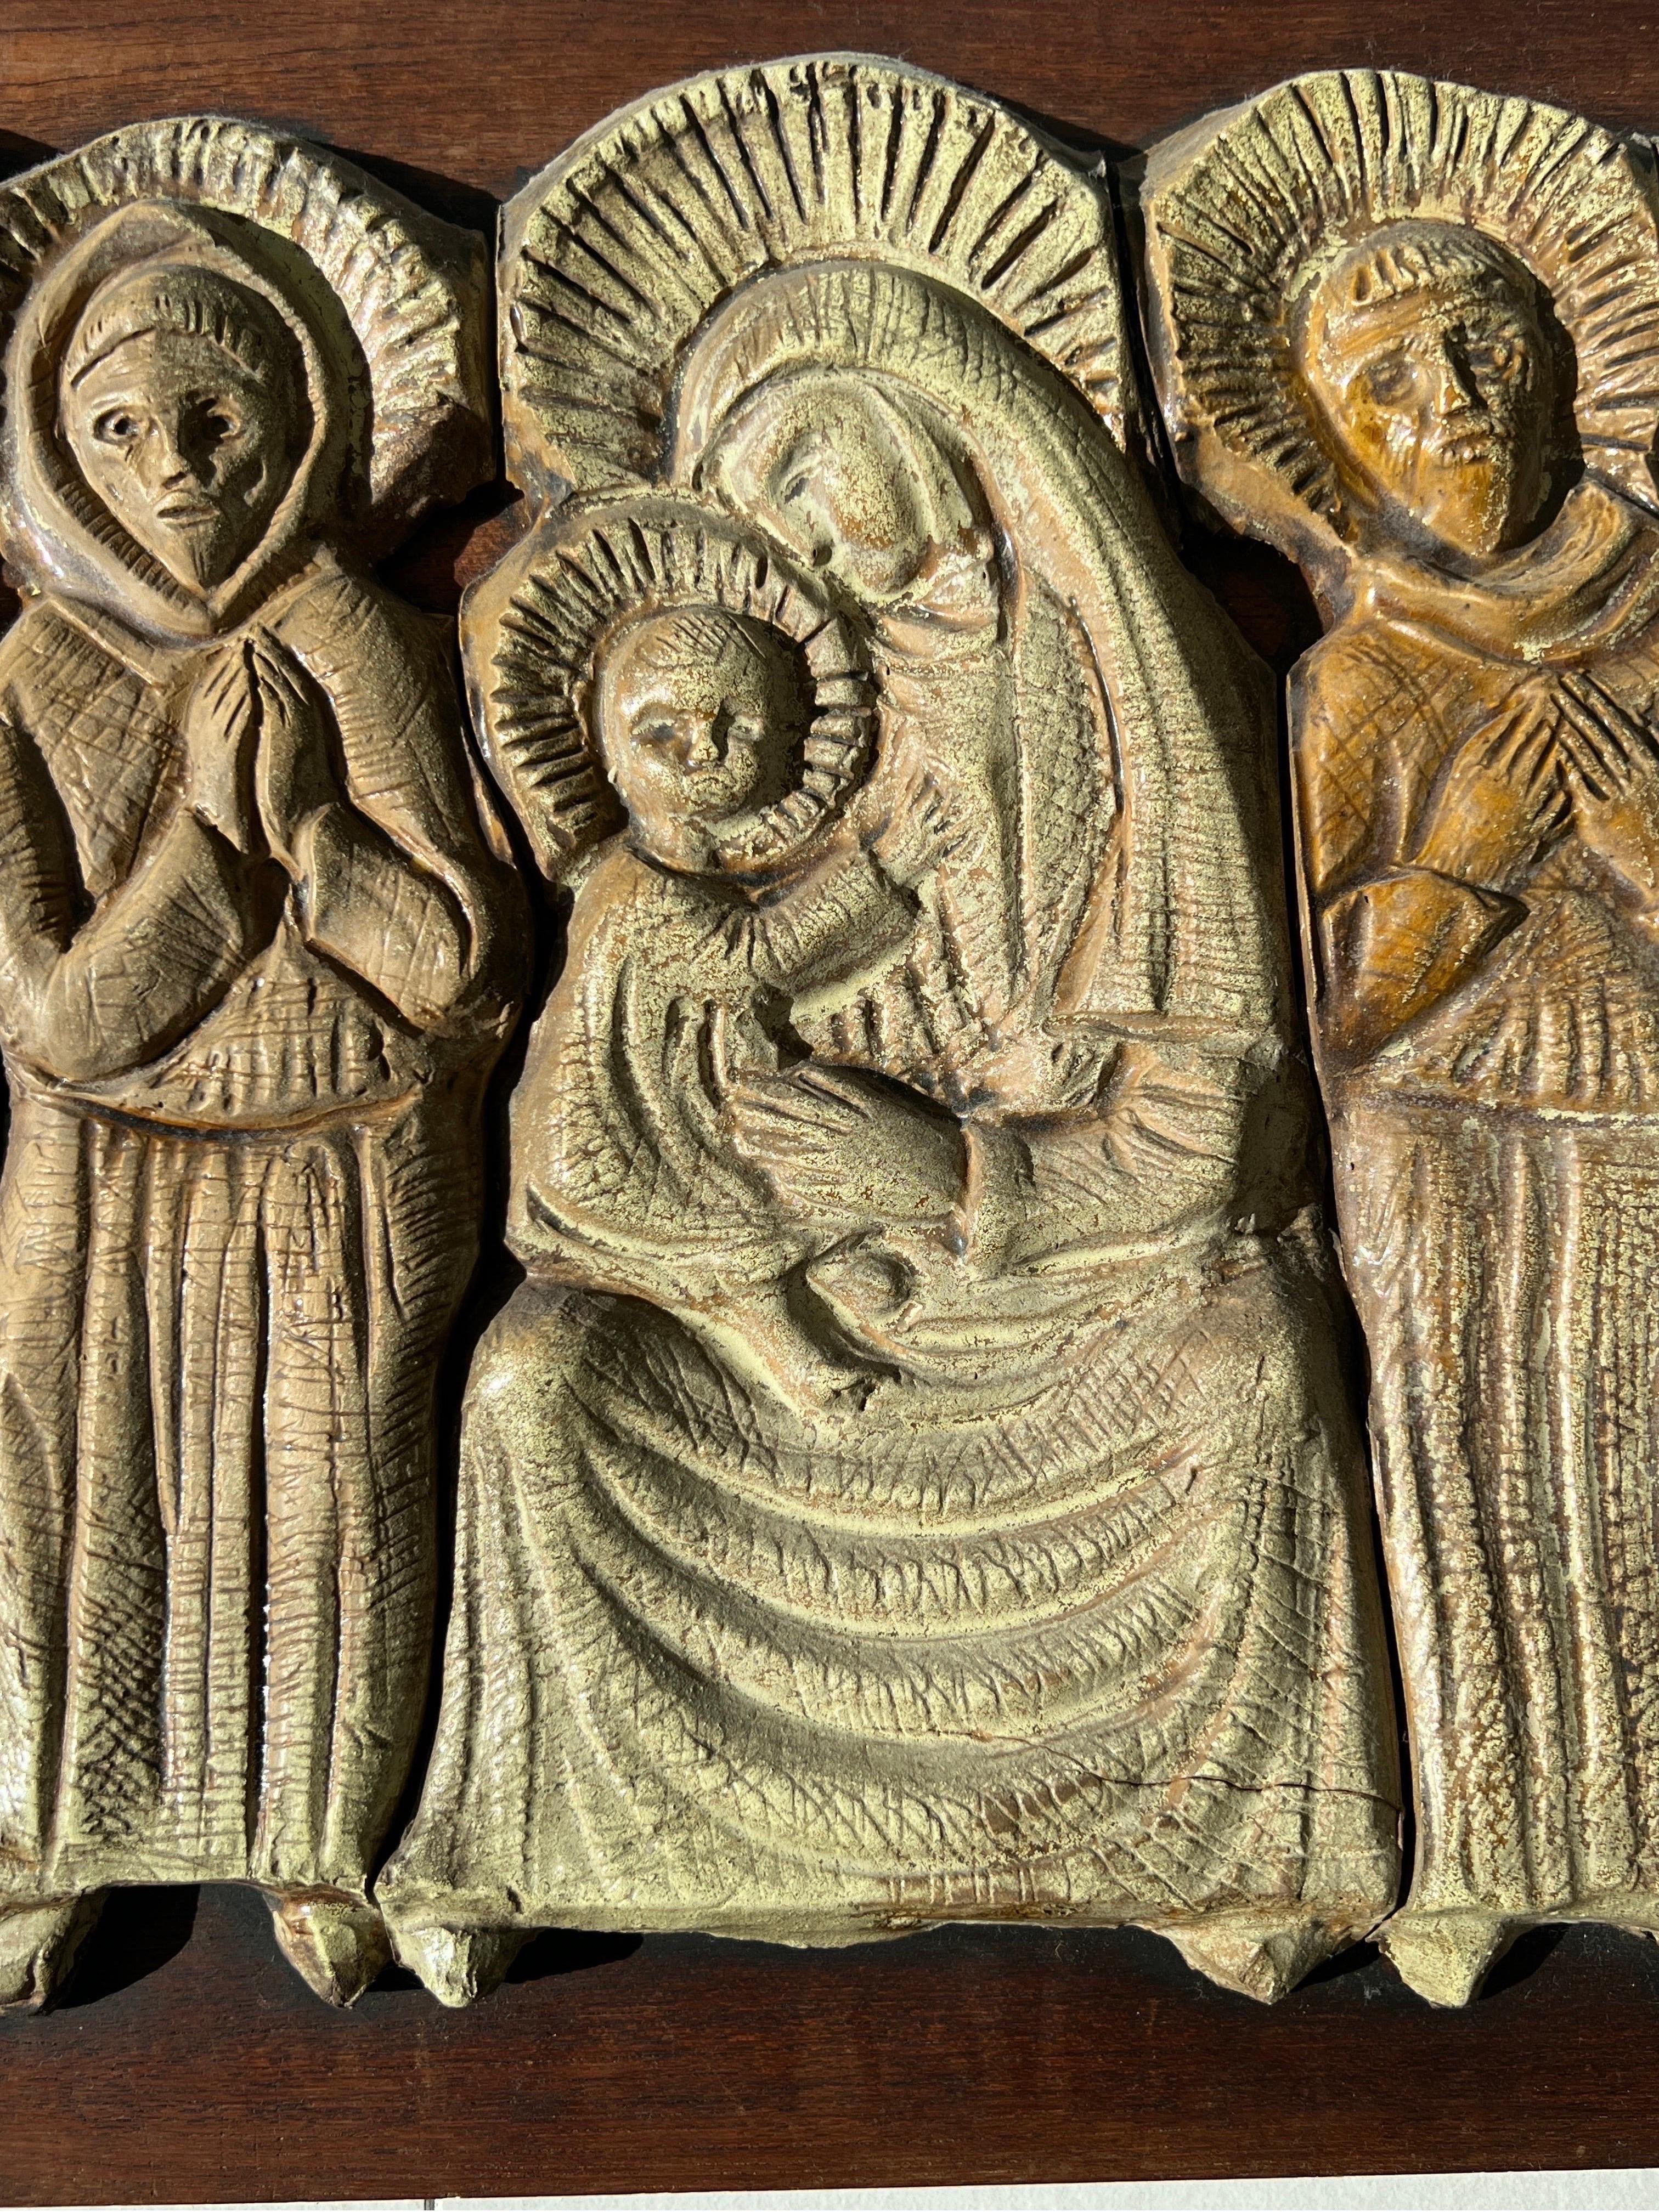 Hand made bas relief from 1960 Italian, Mary holding baby Jesus accompanied by 6 Saints, made in resin on wood panel.